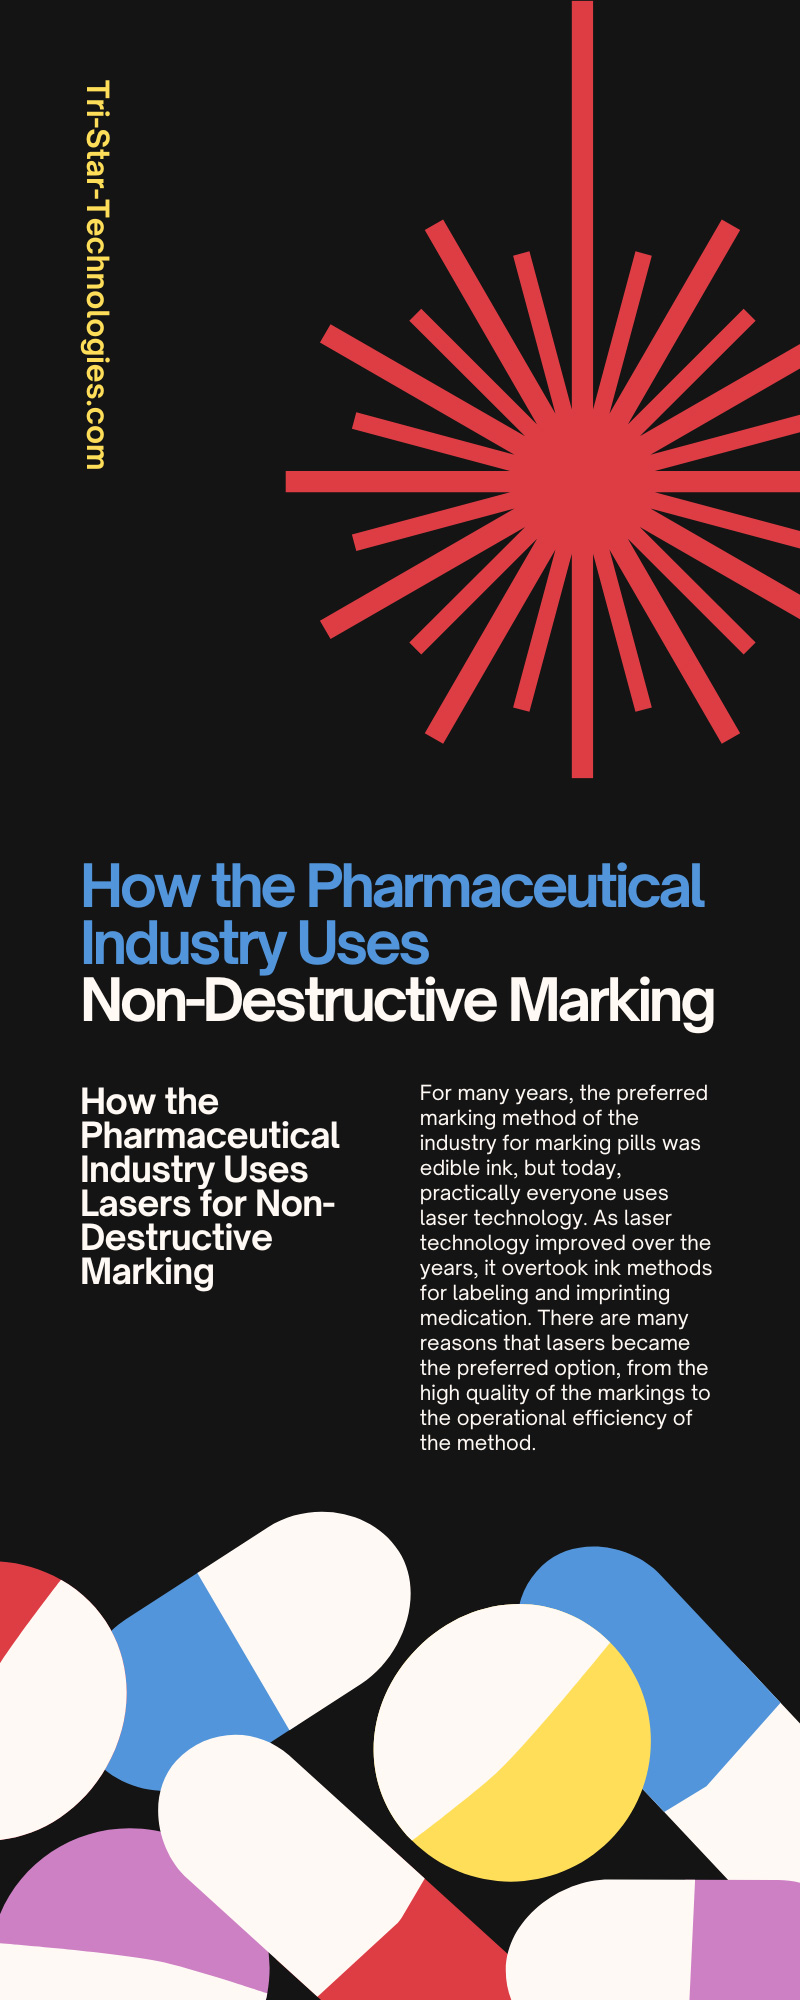 How the Pharmaceutical Industry Uses Non-Destructive Marking